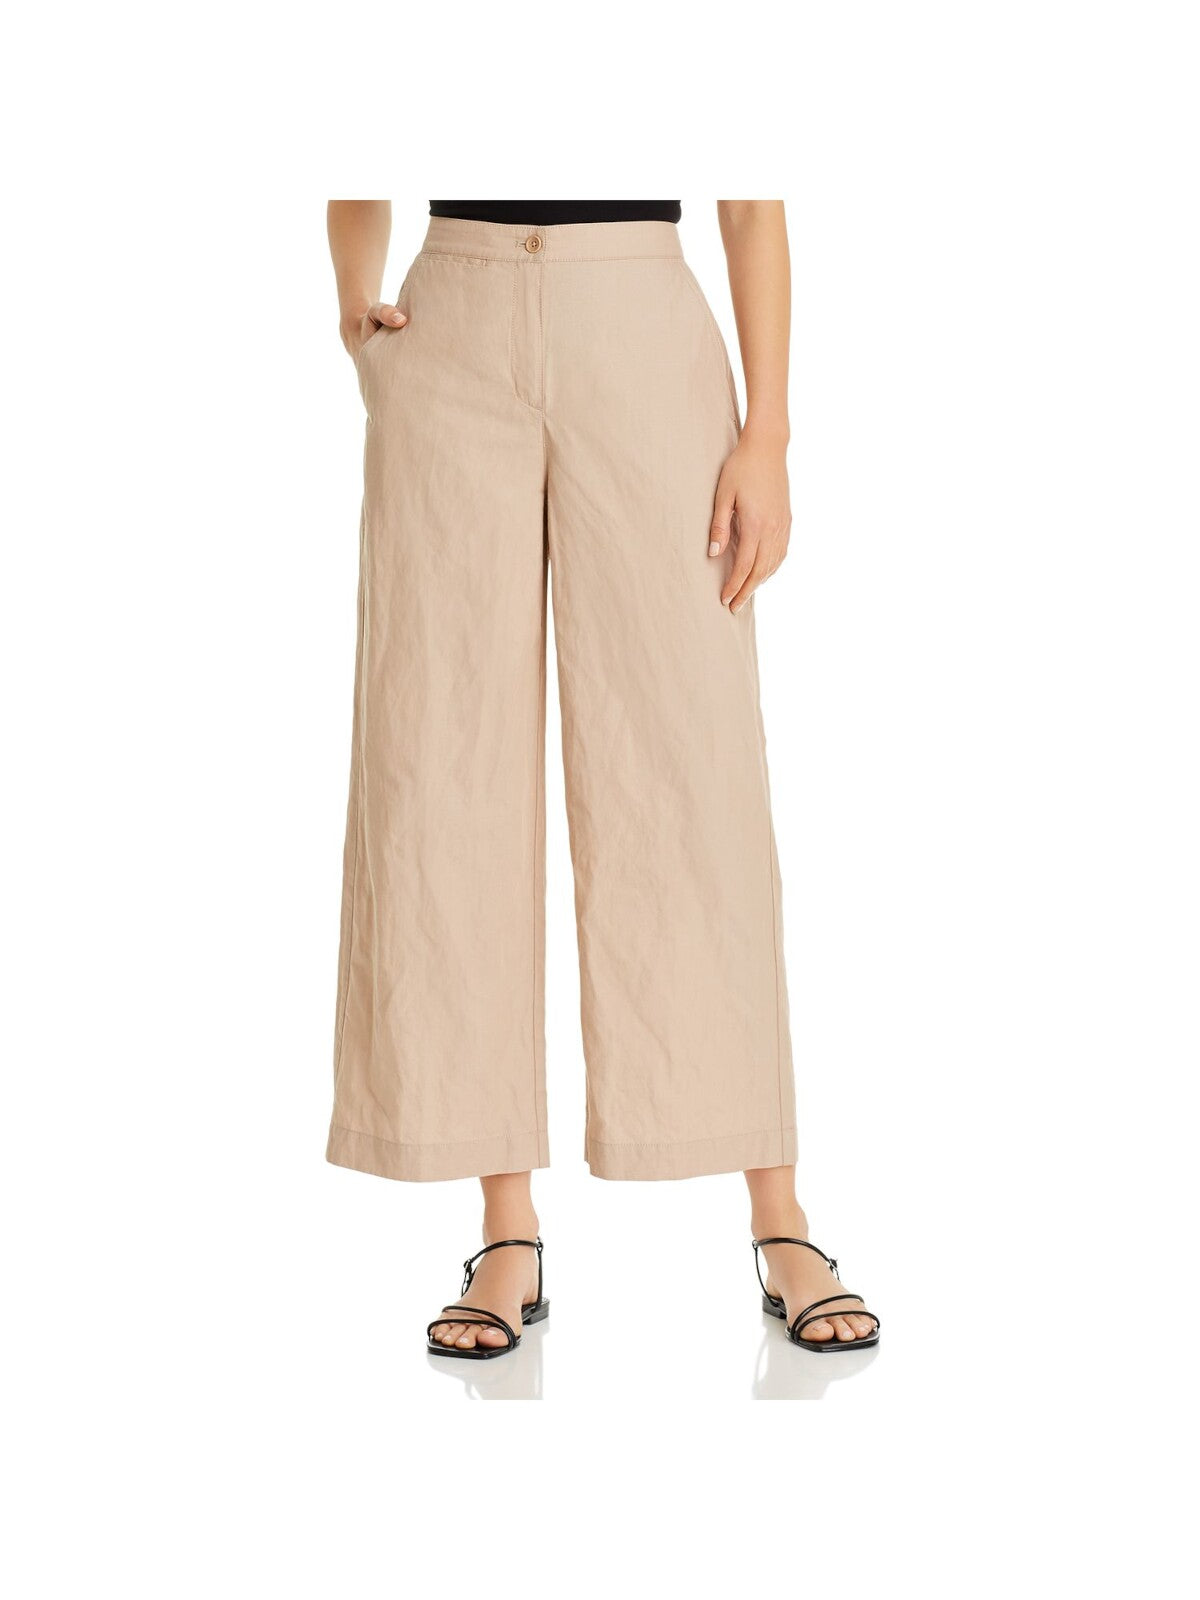 EILEEN FISHER Womens Beige Pocketed Zippered Ankle Wide Leg Pants 2